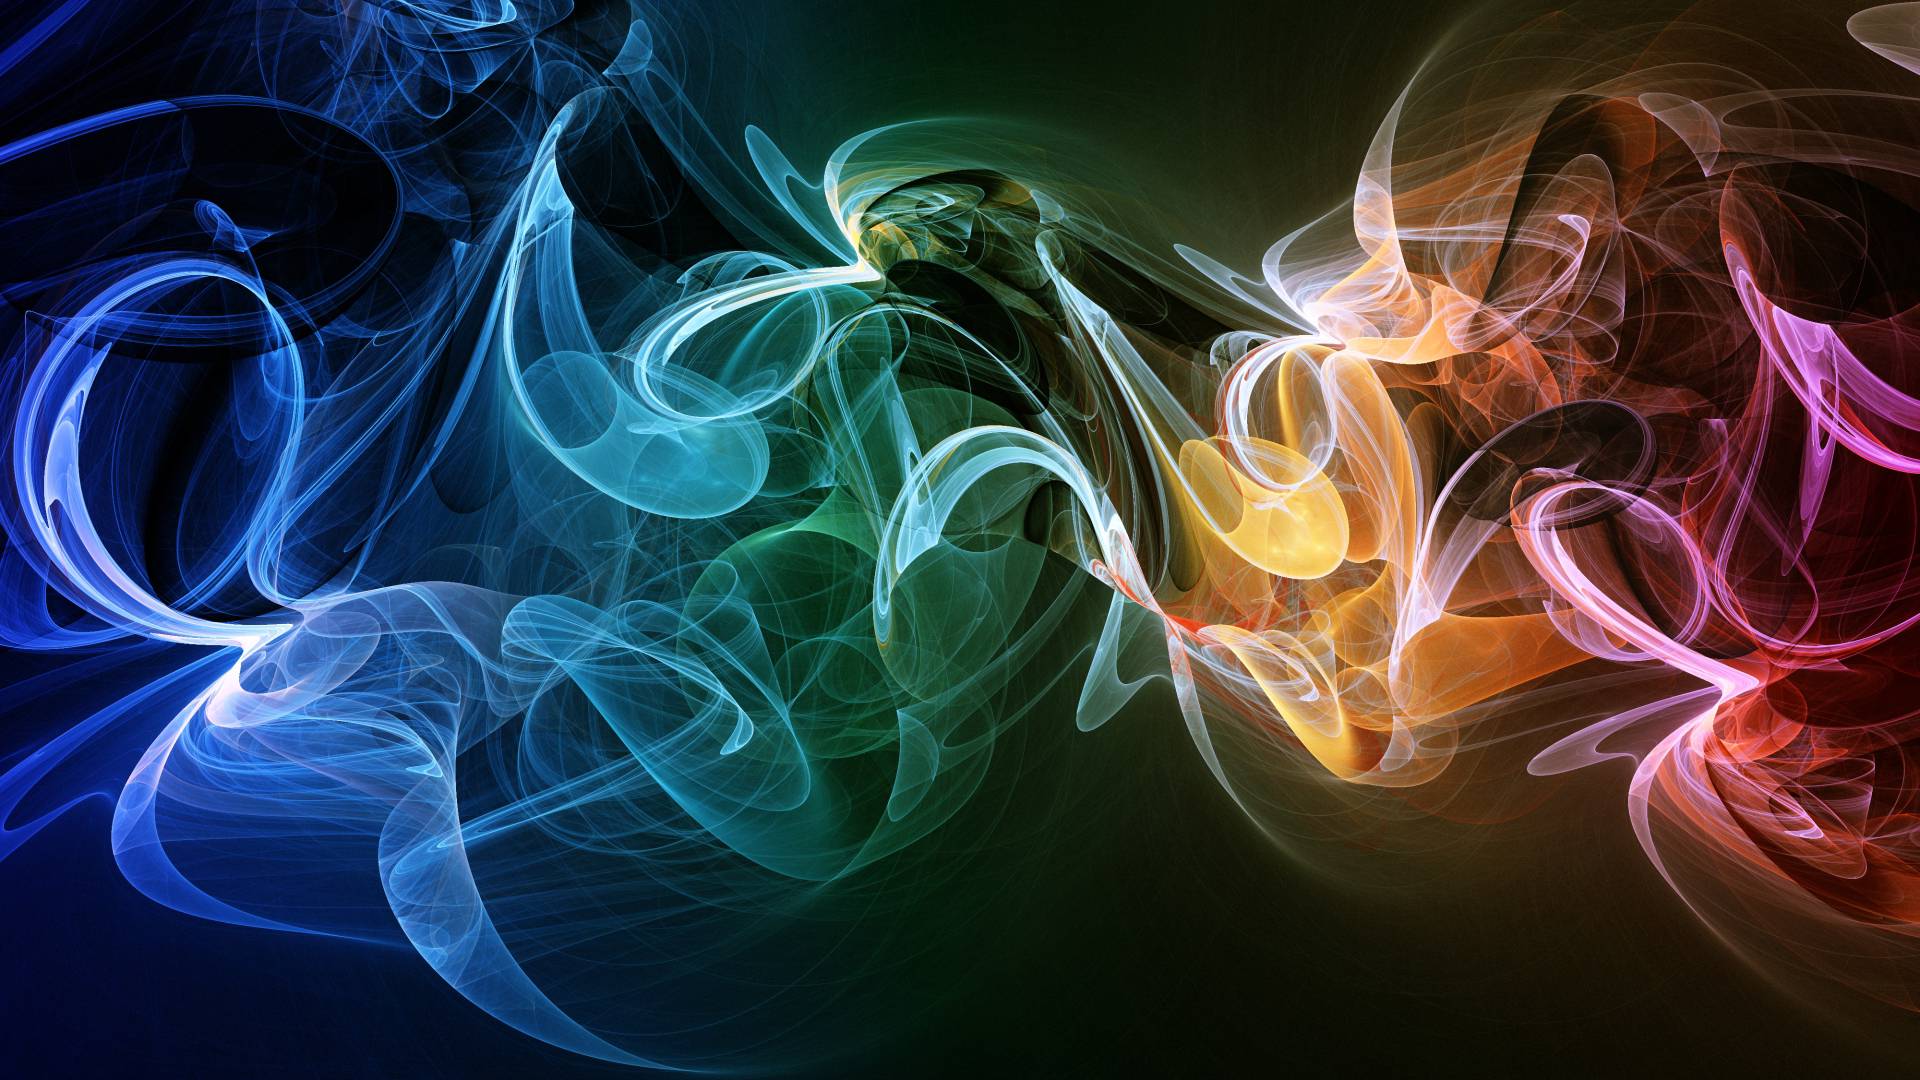 Abstract Wallpaper Free 1920 X 1080 Abstract Background